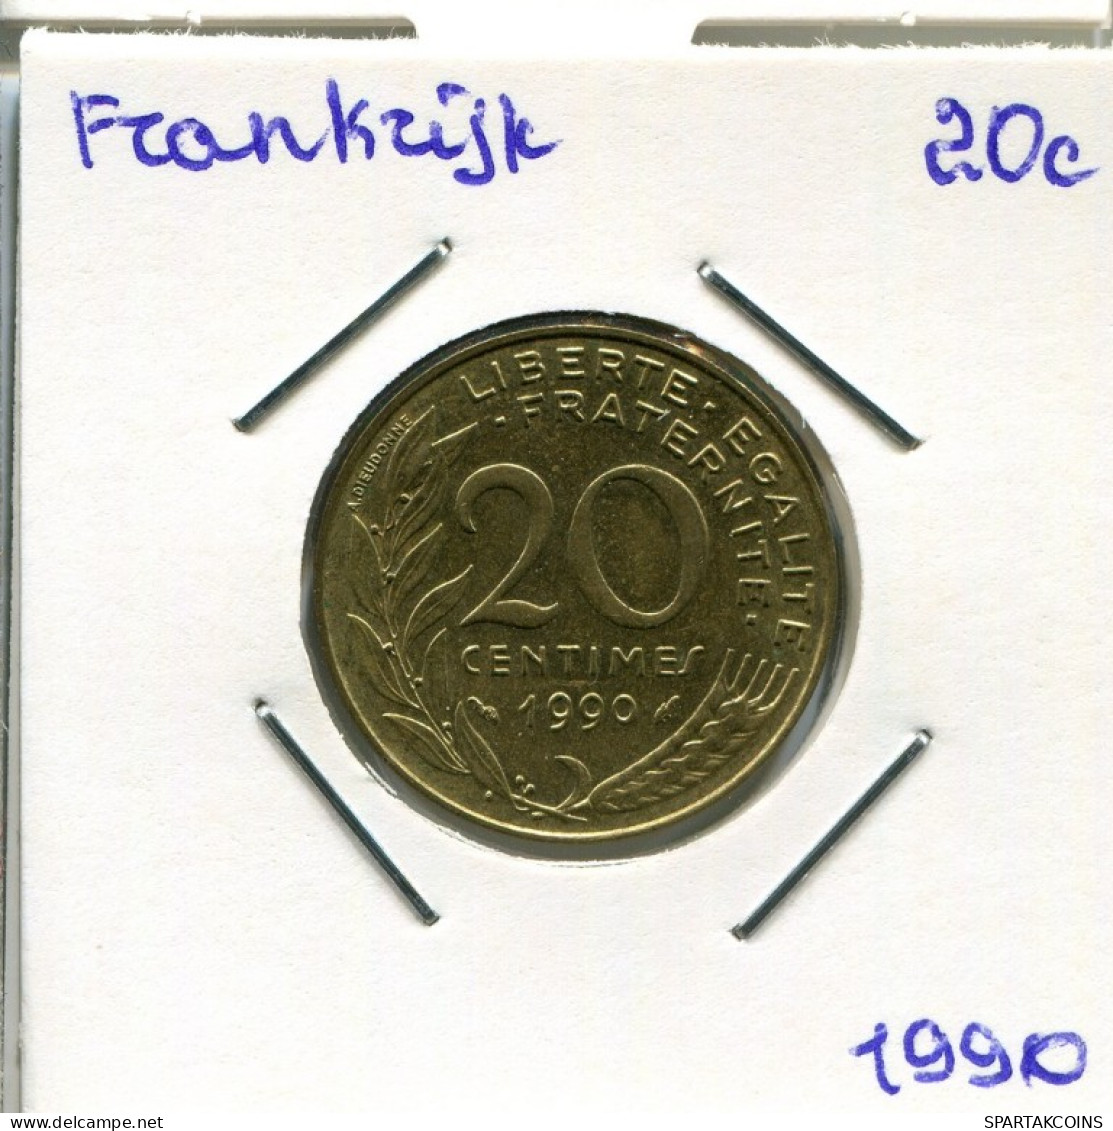 20 CENTIMES 1990 FRANCE Coin French Coin #AM871.U.A - 20 Centimes